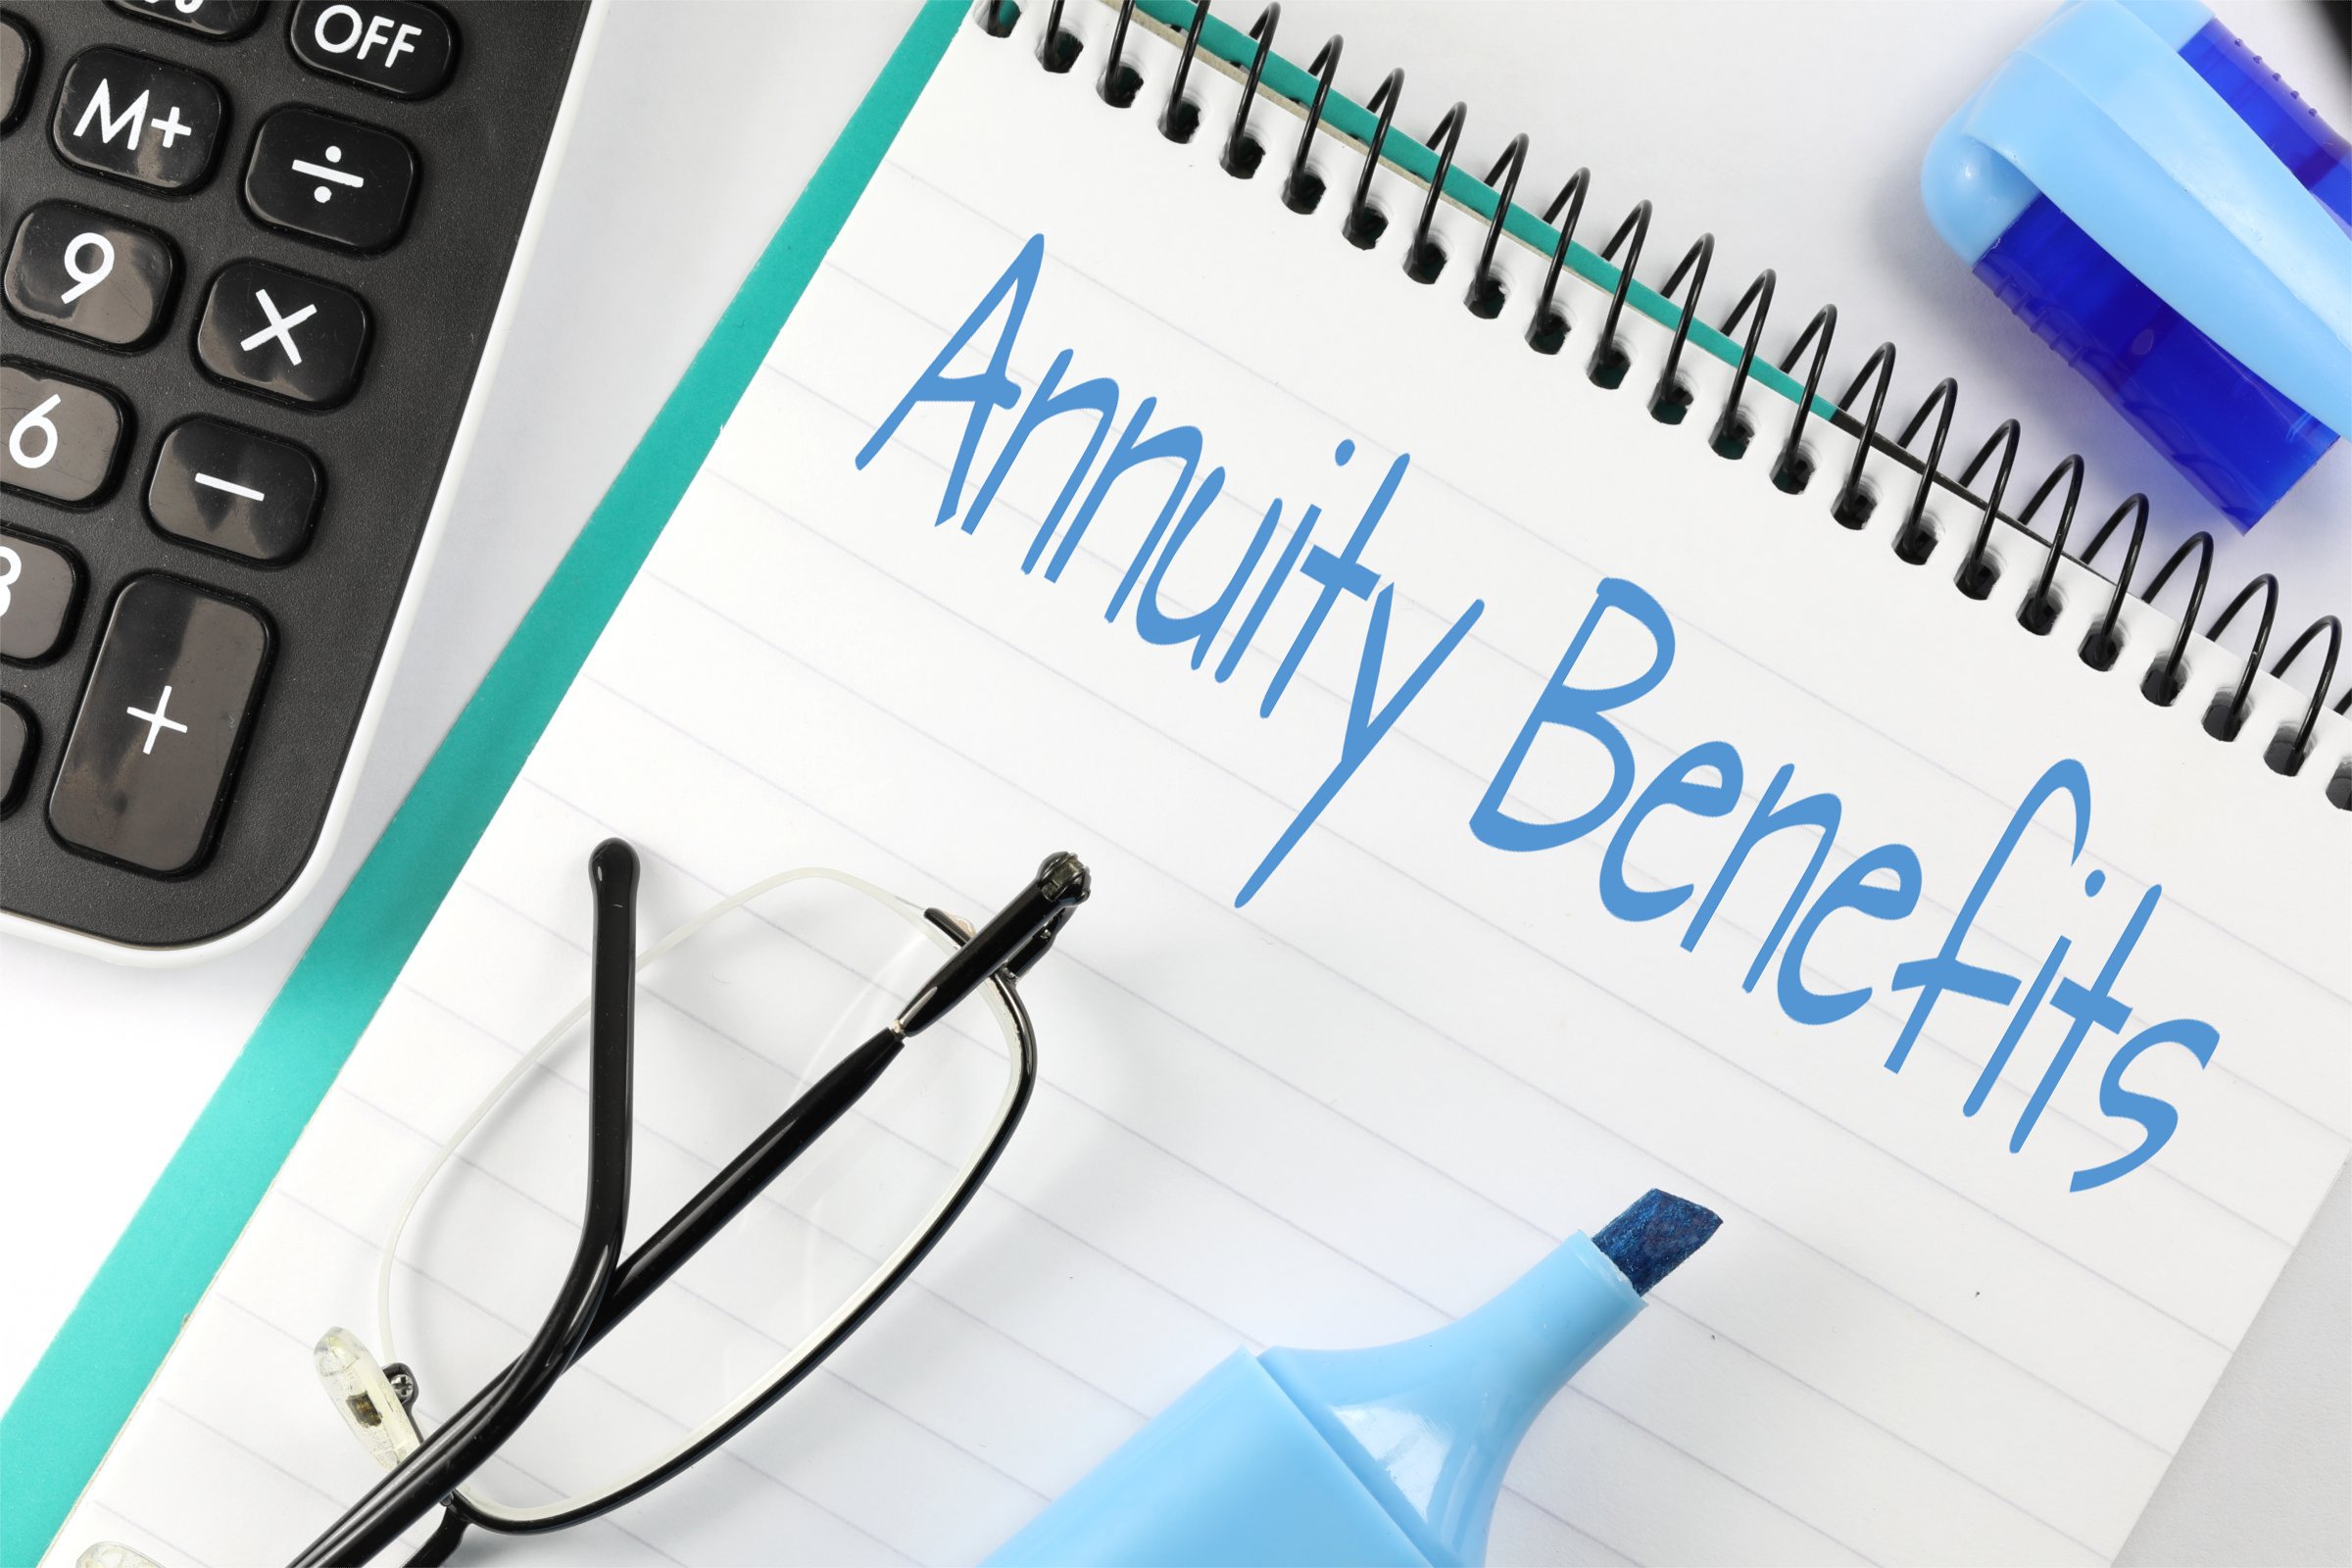 annuity benefits